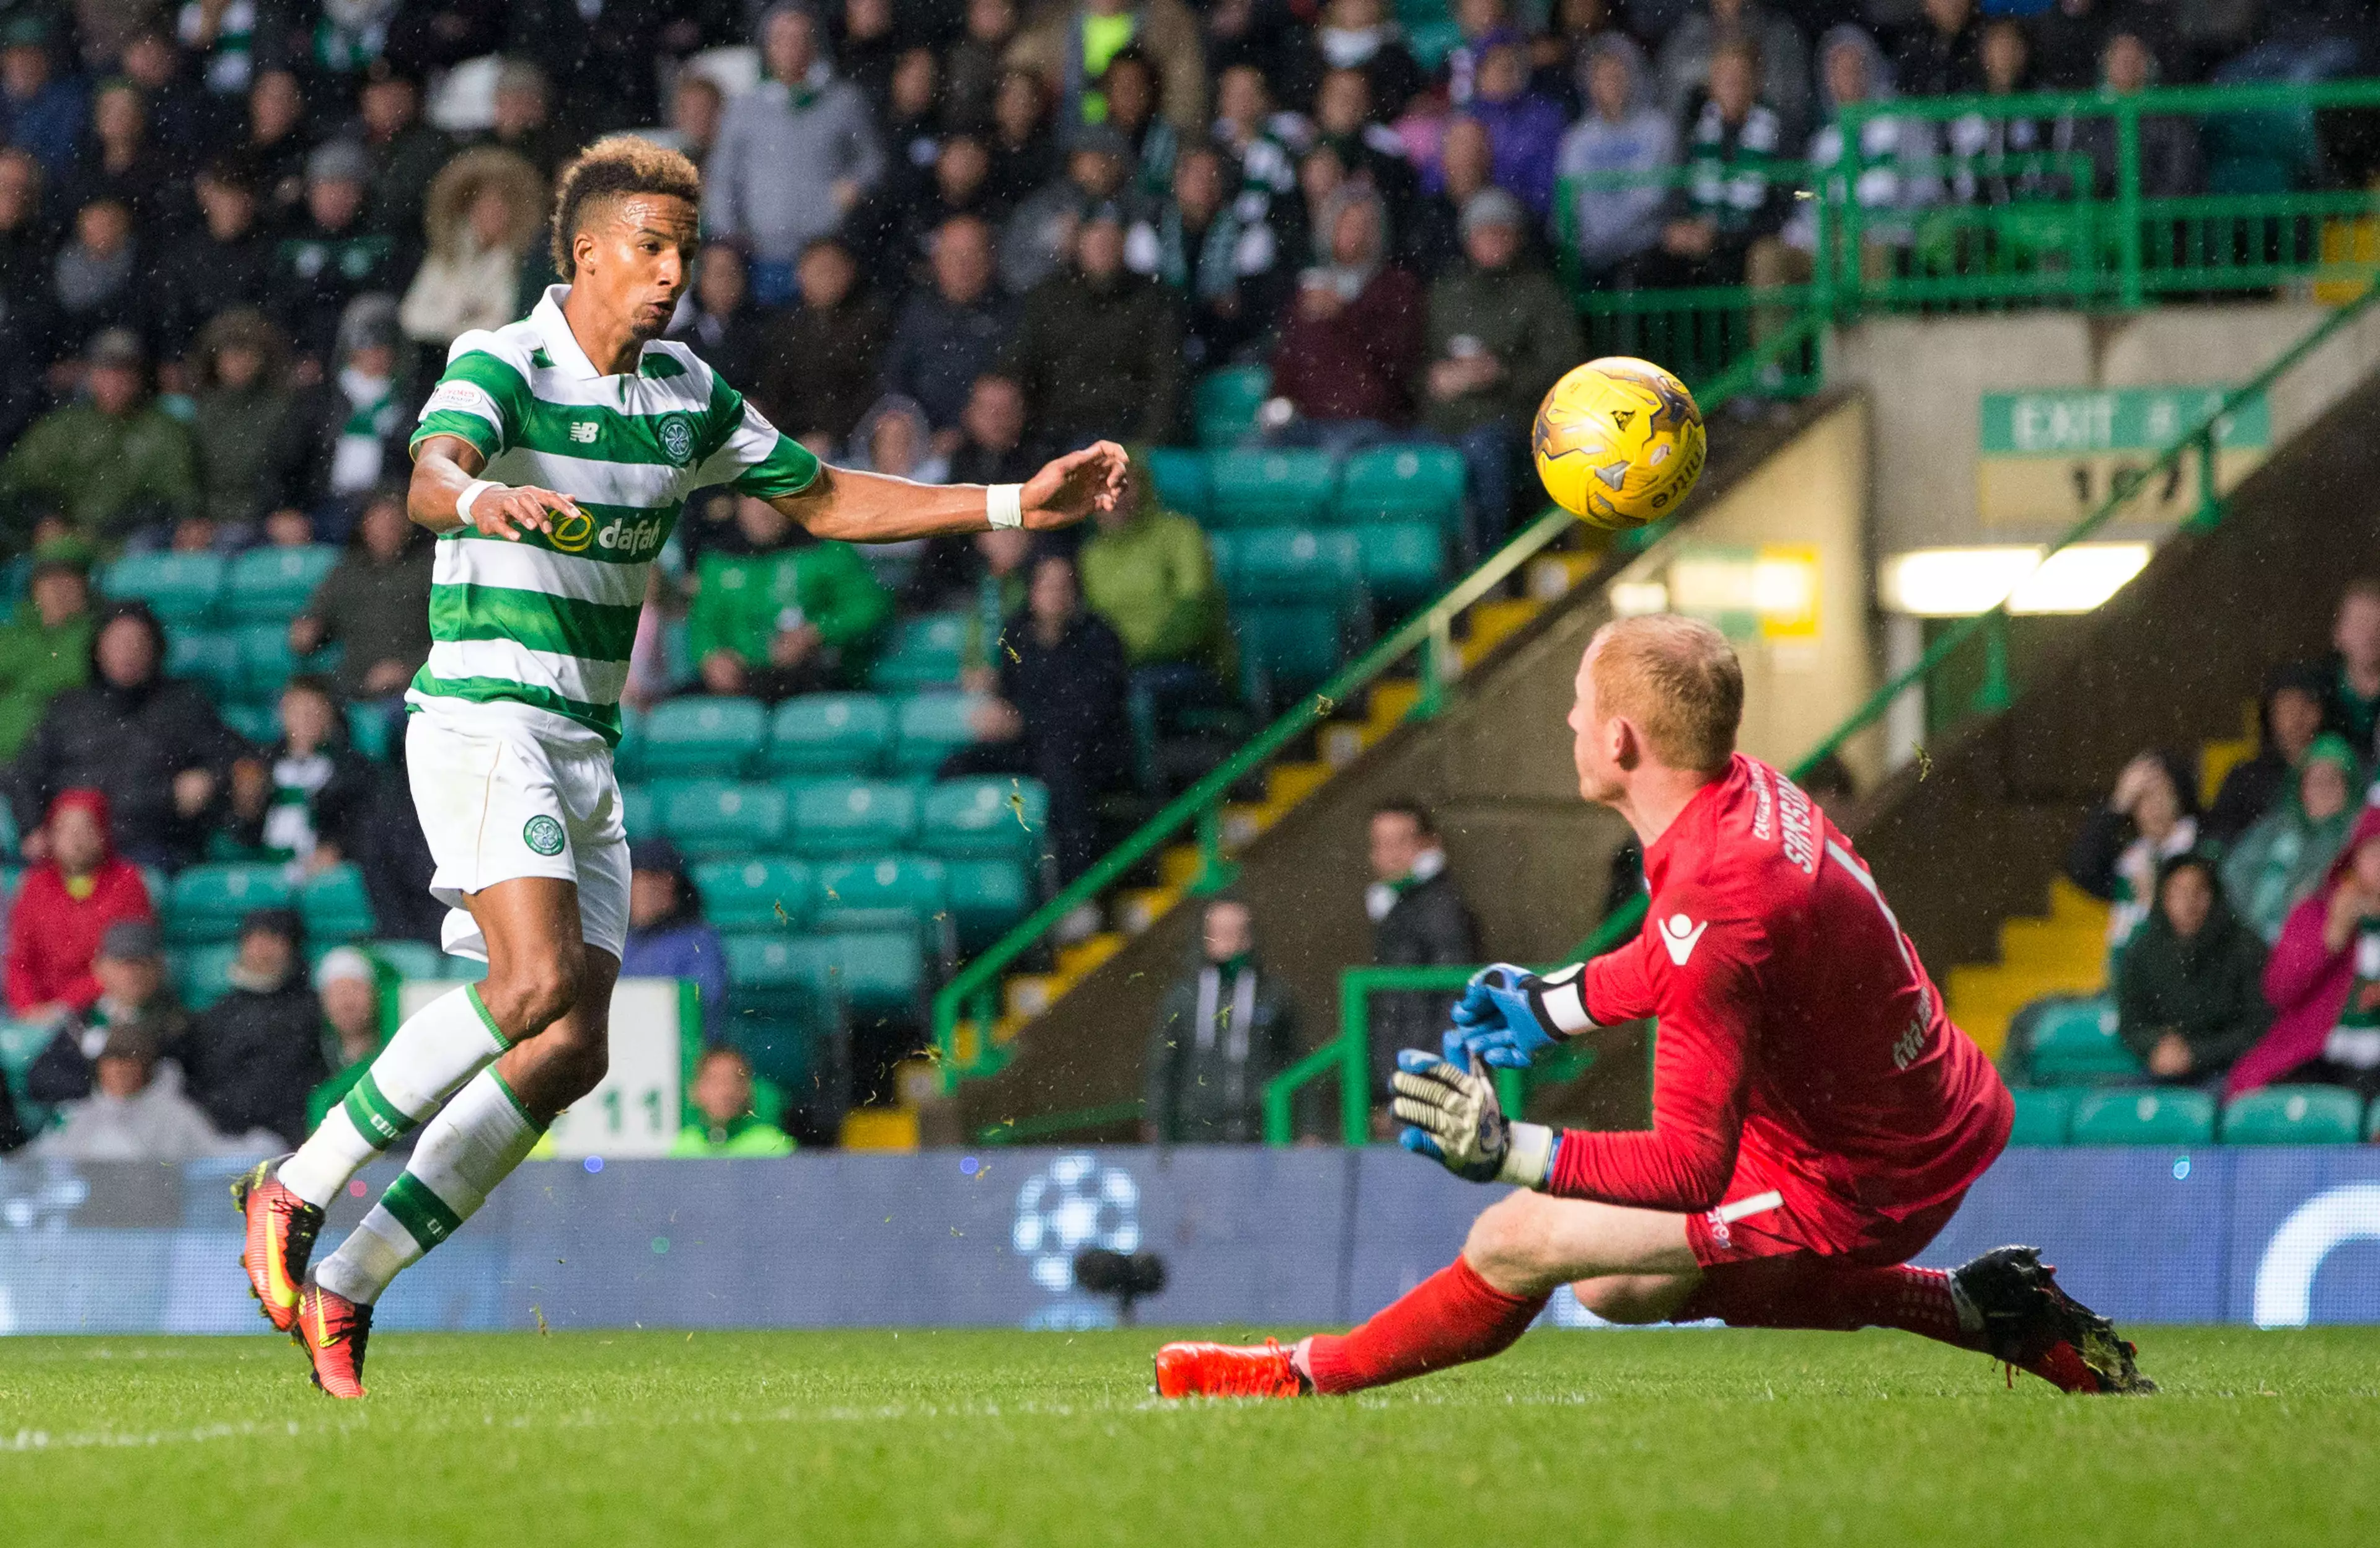 Scott Sinclair Gets Some Sound Advice Ahead Of Old Firm Derby